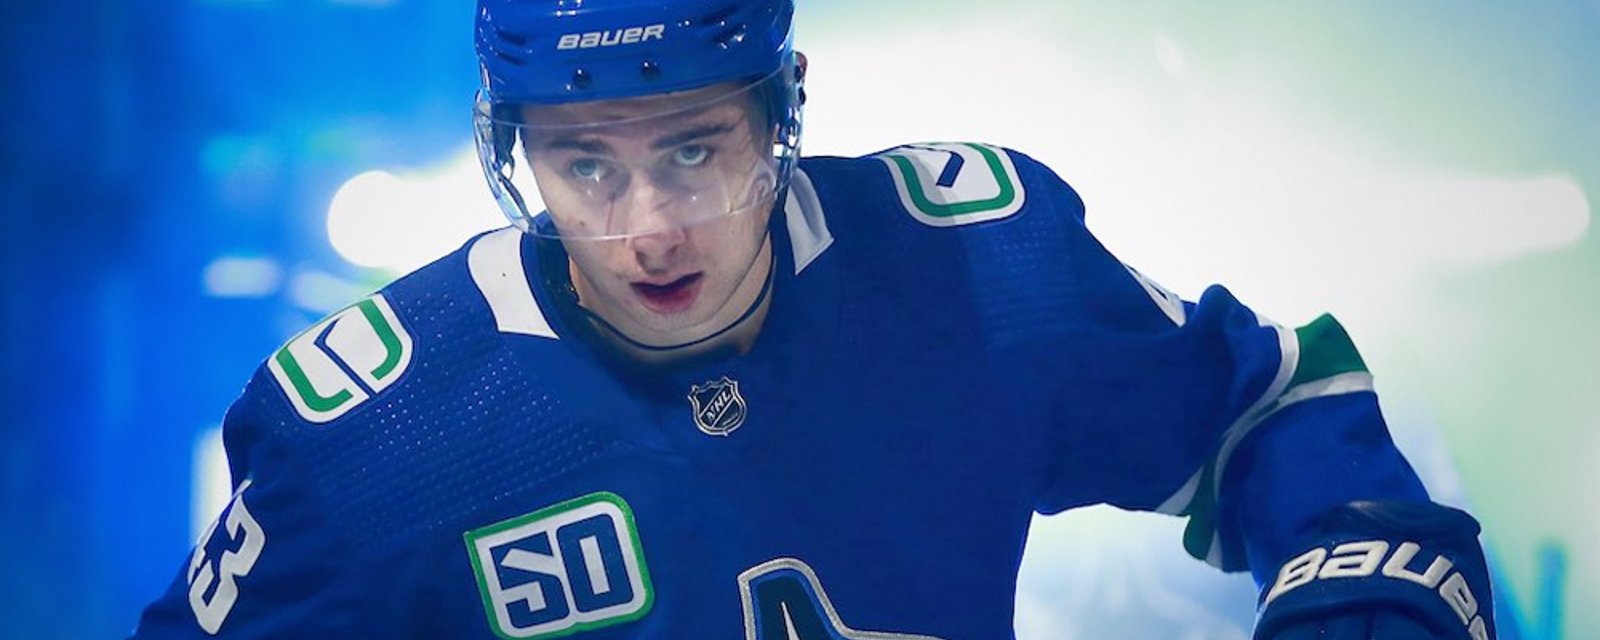 Quinn Hughes joins Bobby Orr and Brian Leetch in the all-time record books